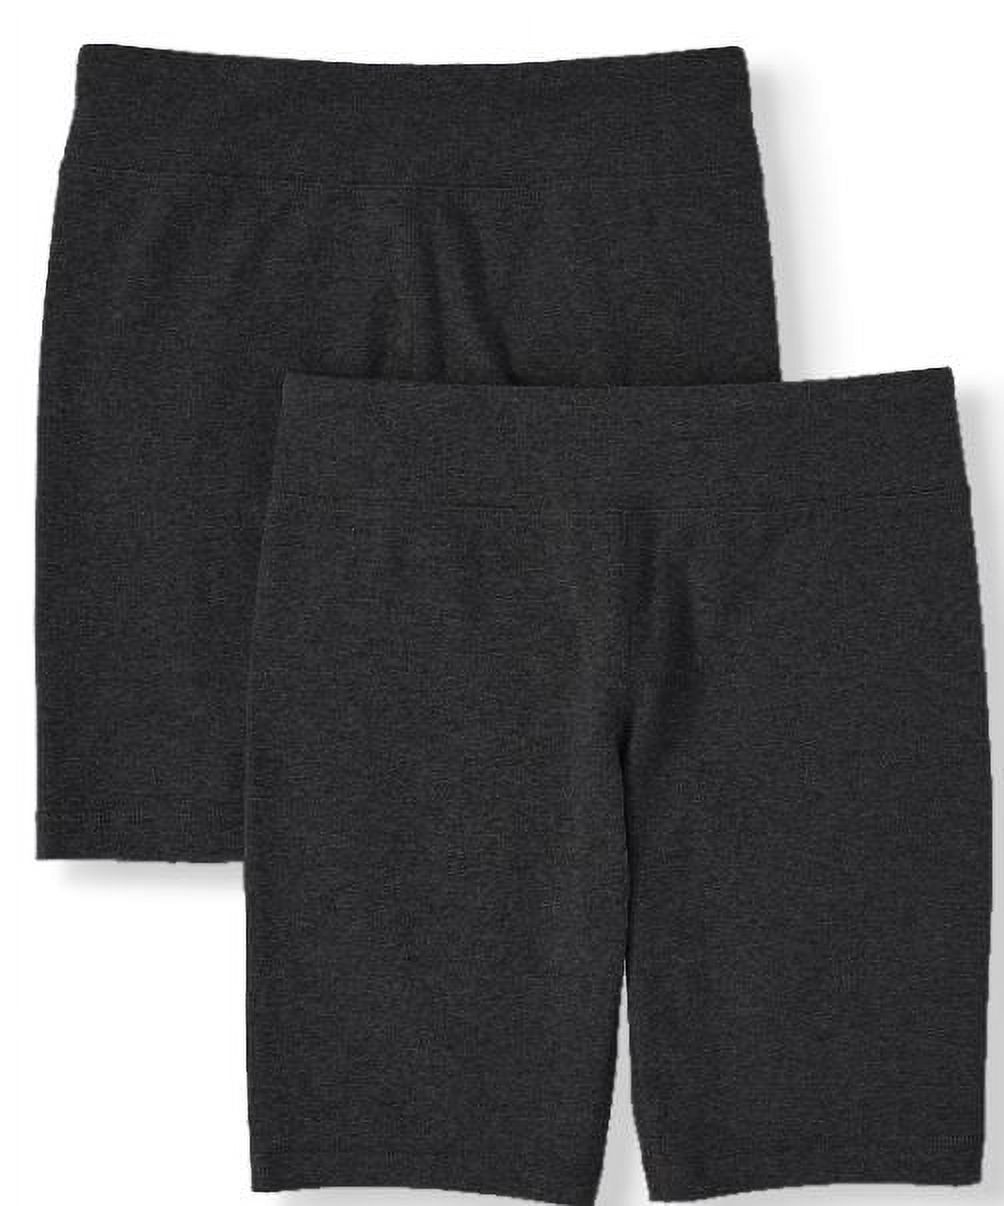 Athletic Works Womens Mid Rise 9" Bike Short, 2 Pack - image 3 of 4